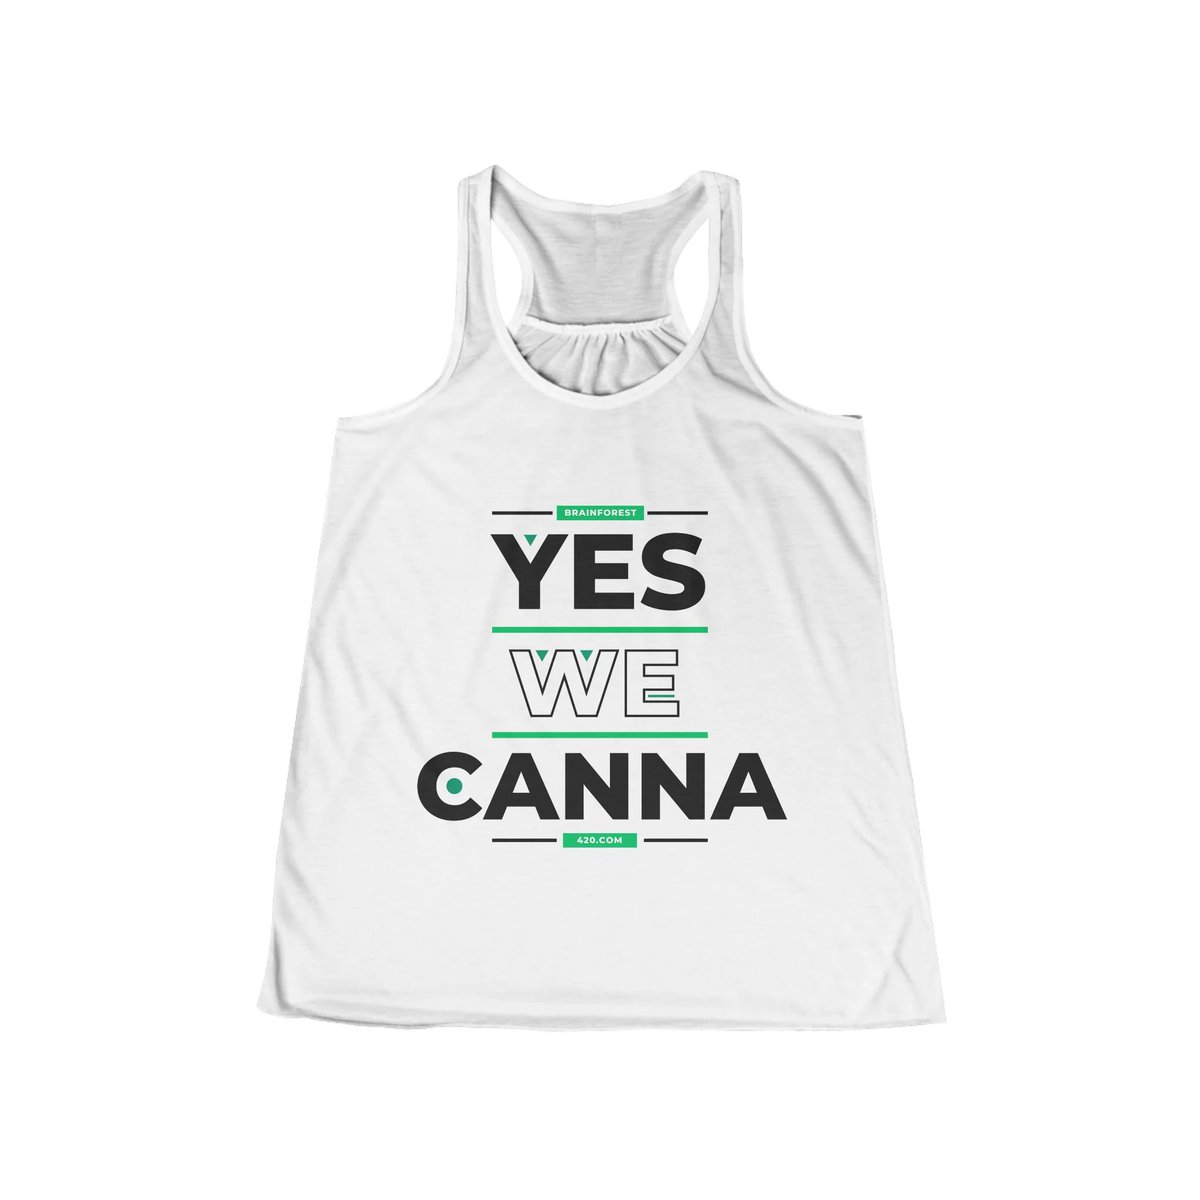 Join the movement, #CannabisCommunity, today & everyday!💪🍃

#YesWeCanna!

brainforest420.com for all your #420Merch needs & wants!